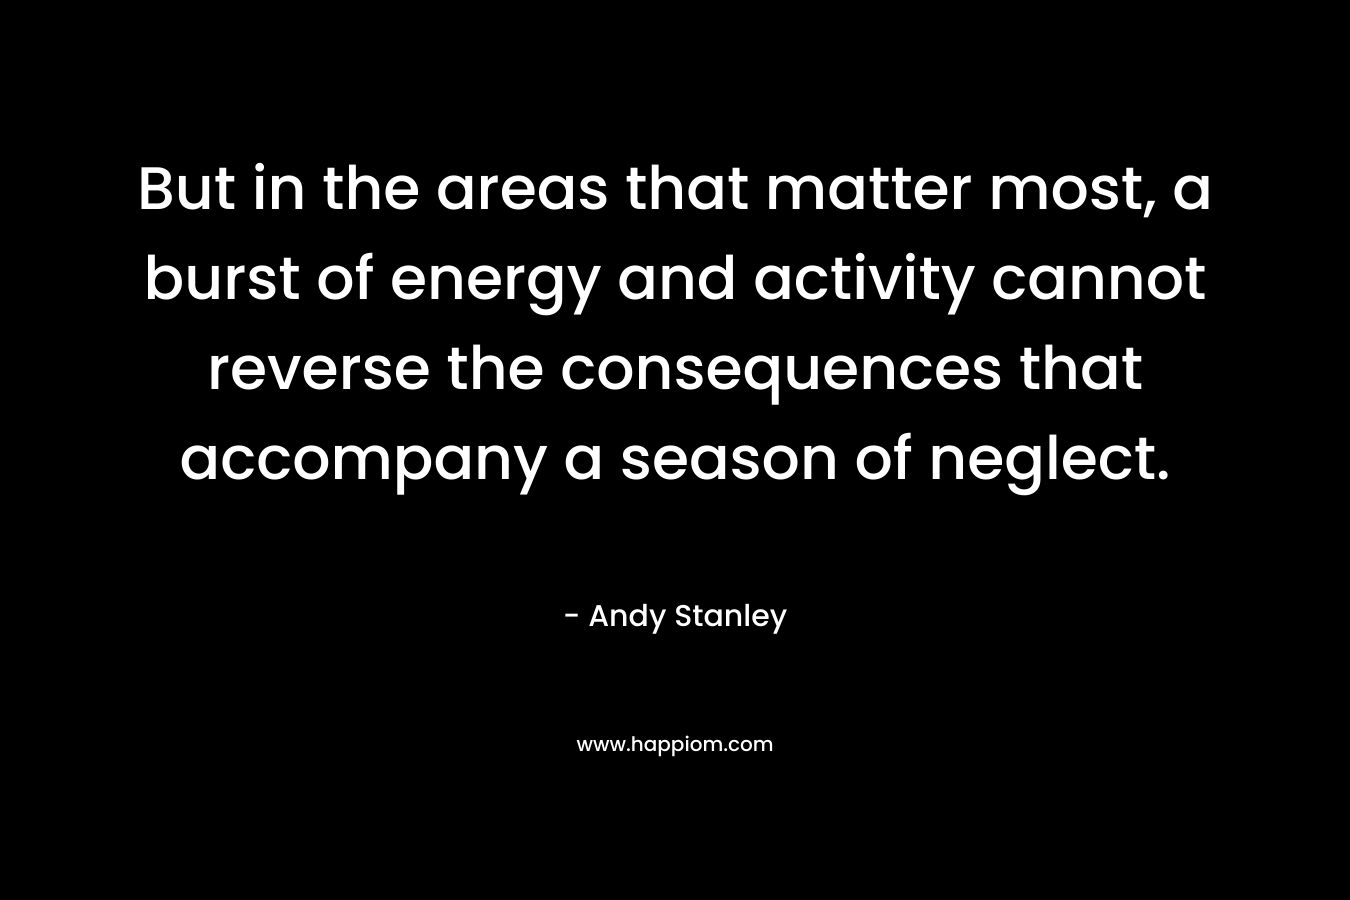 But in the areas that matter most, a burst of energy and activity cannot reverse the consequences that accompany a season of neglect.